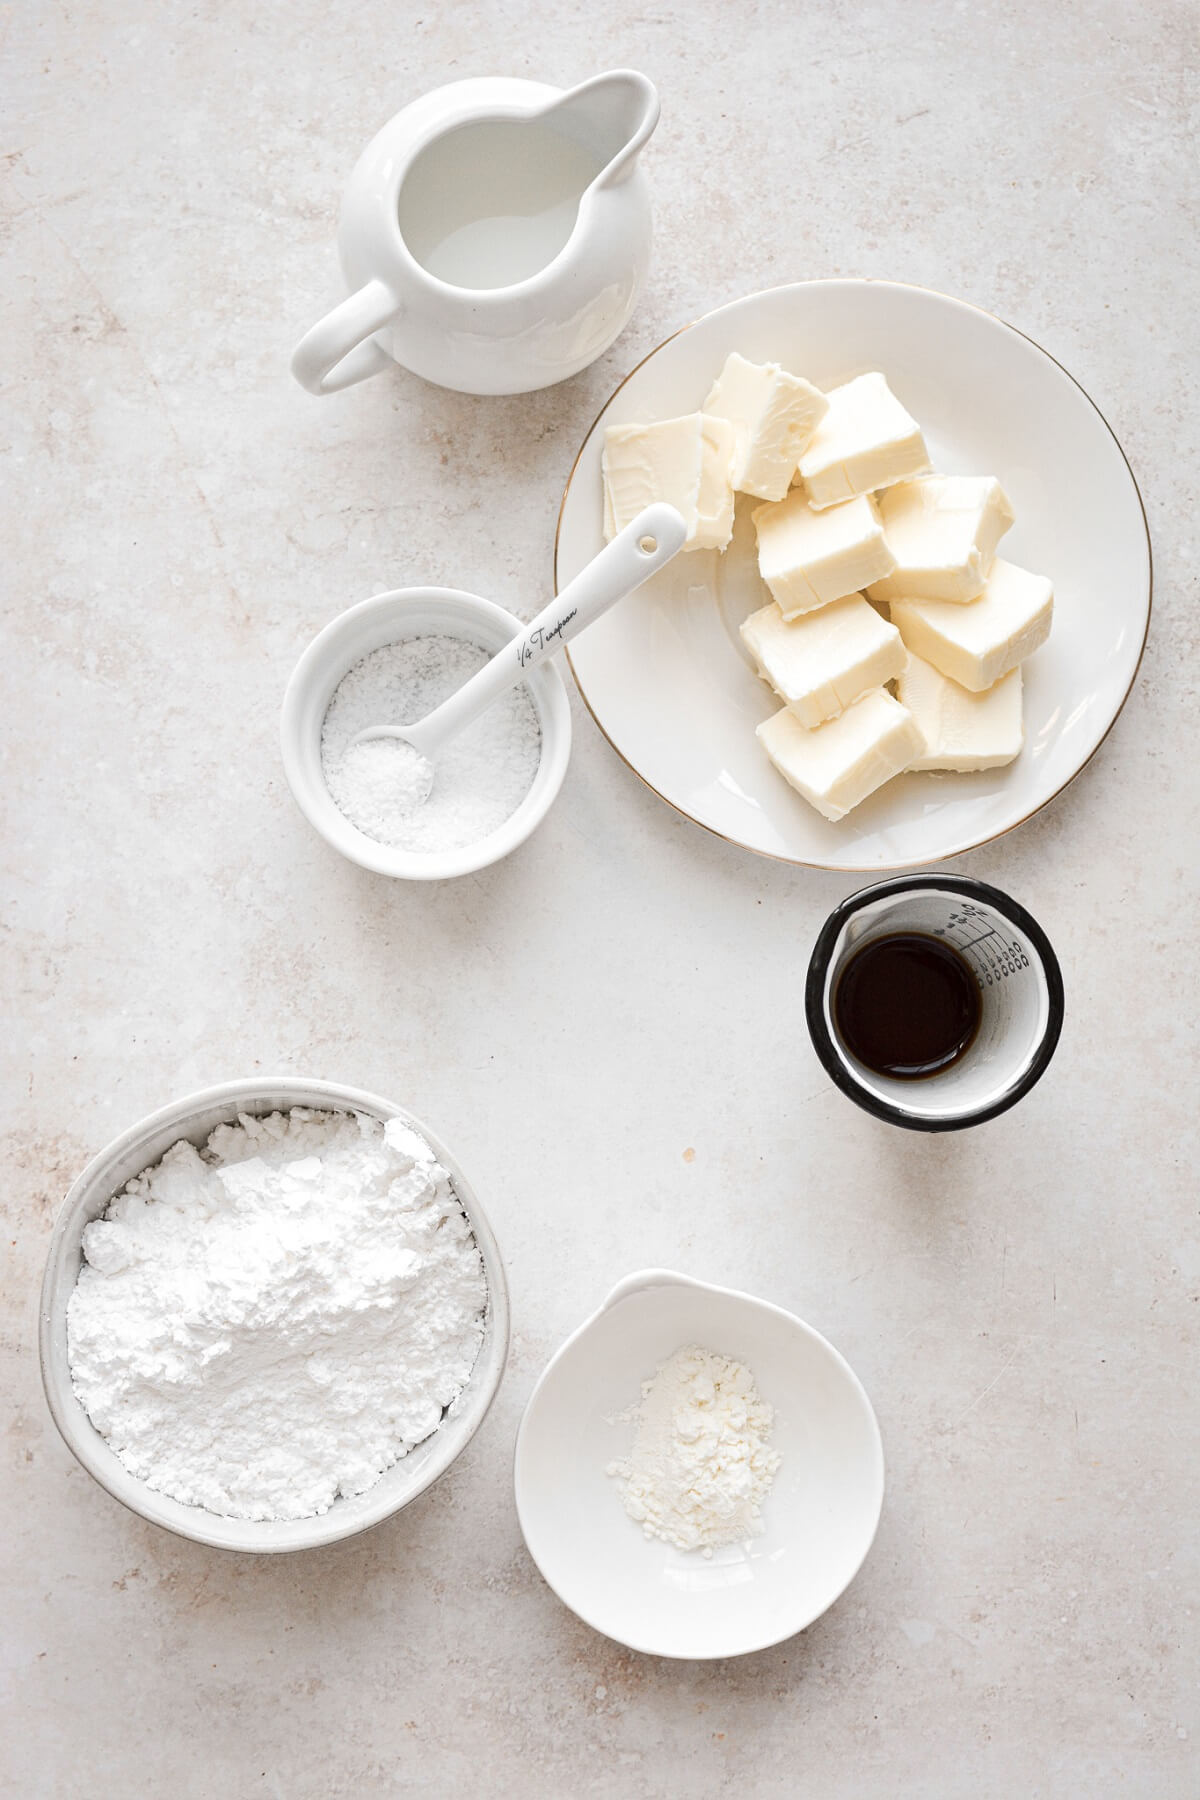 Ingredients for making American buttercream.